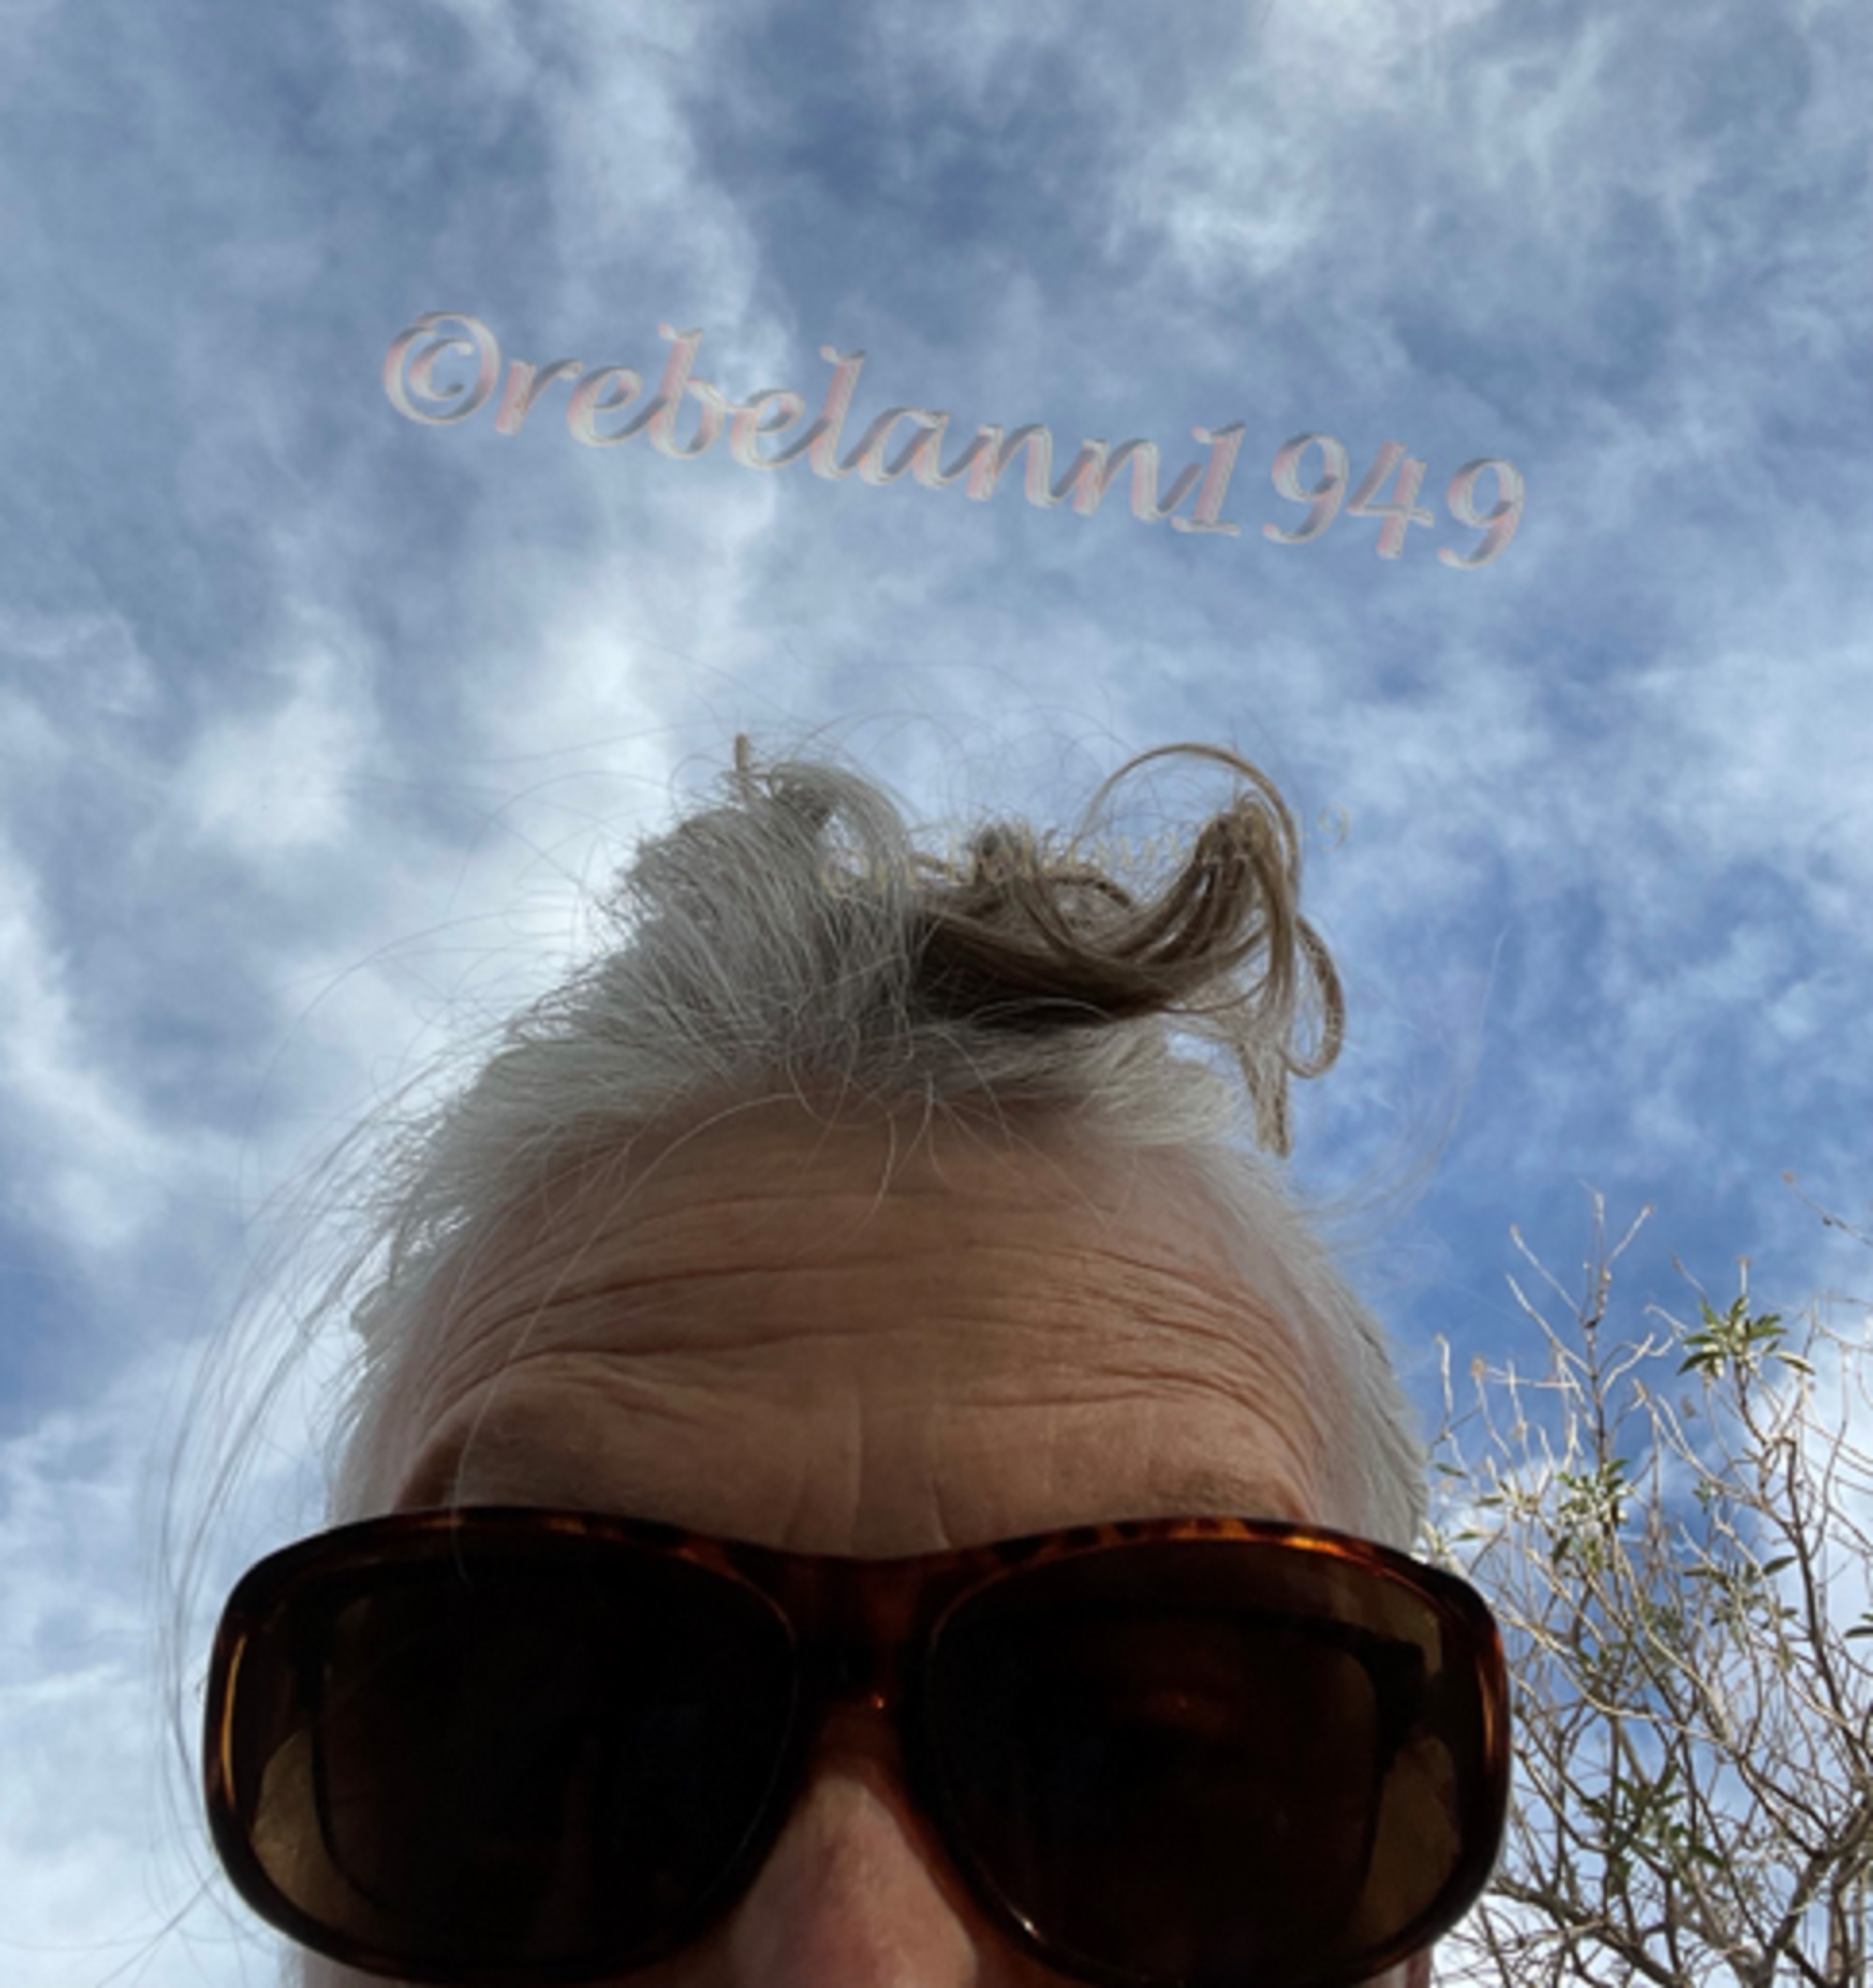 My forehead and the clouds